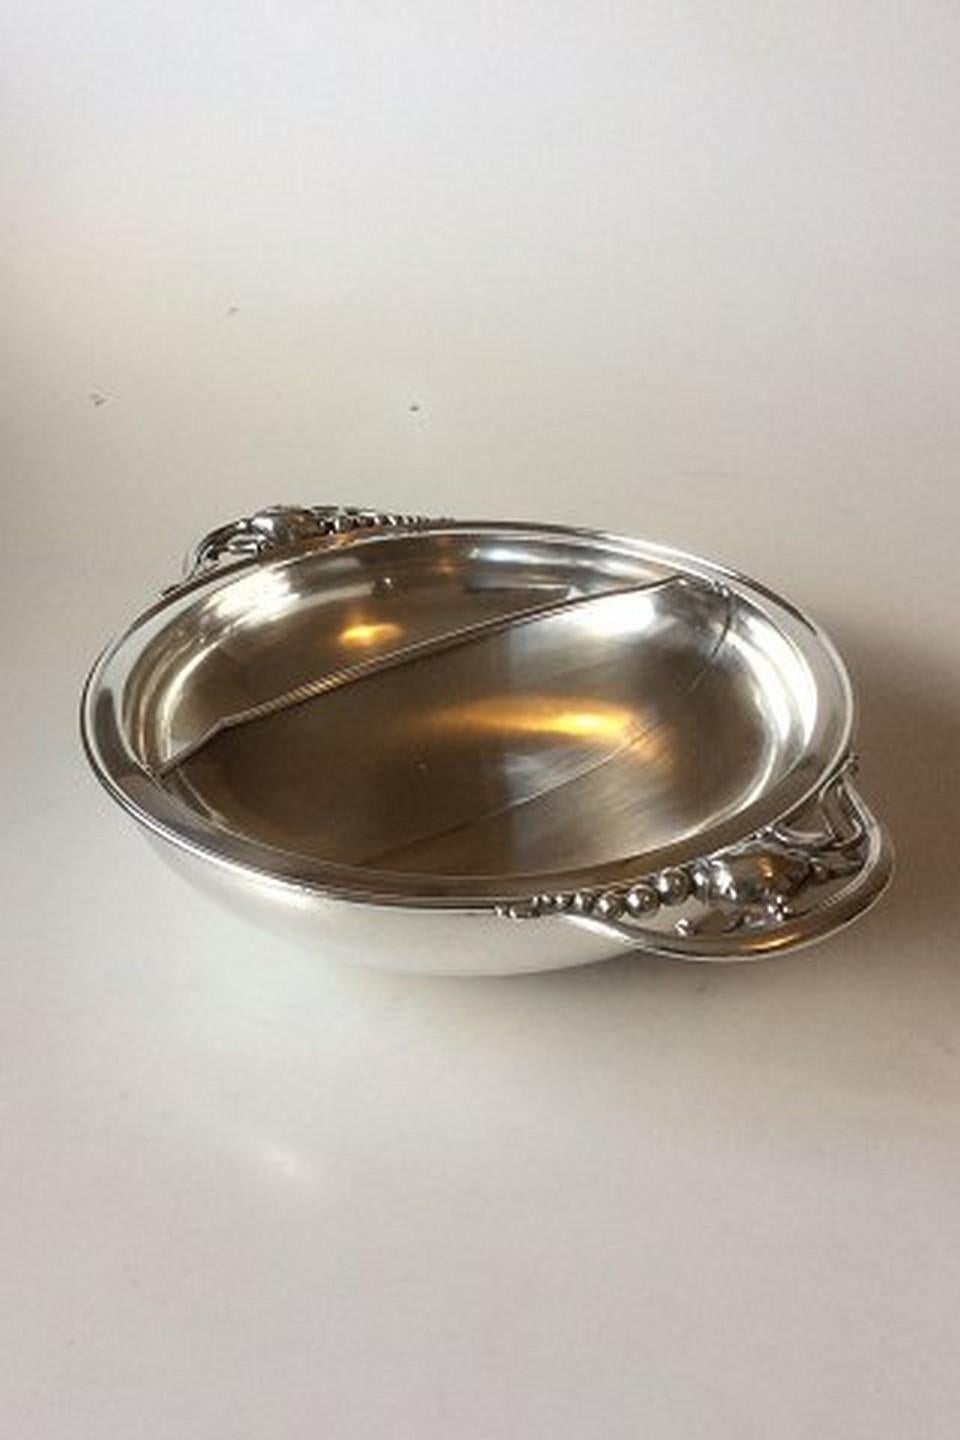 Georg Jensen sterling silver blossom bowl with three rooms #2E. Measures: 31 cm diameter (12 13/64